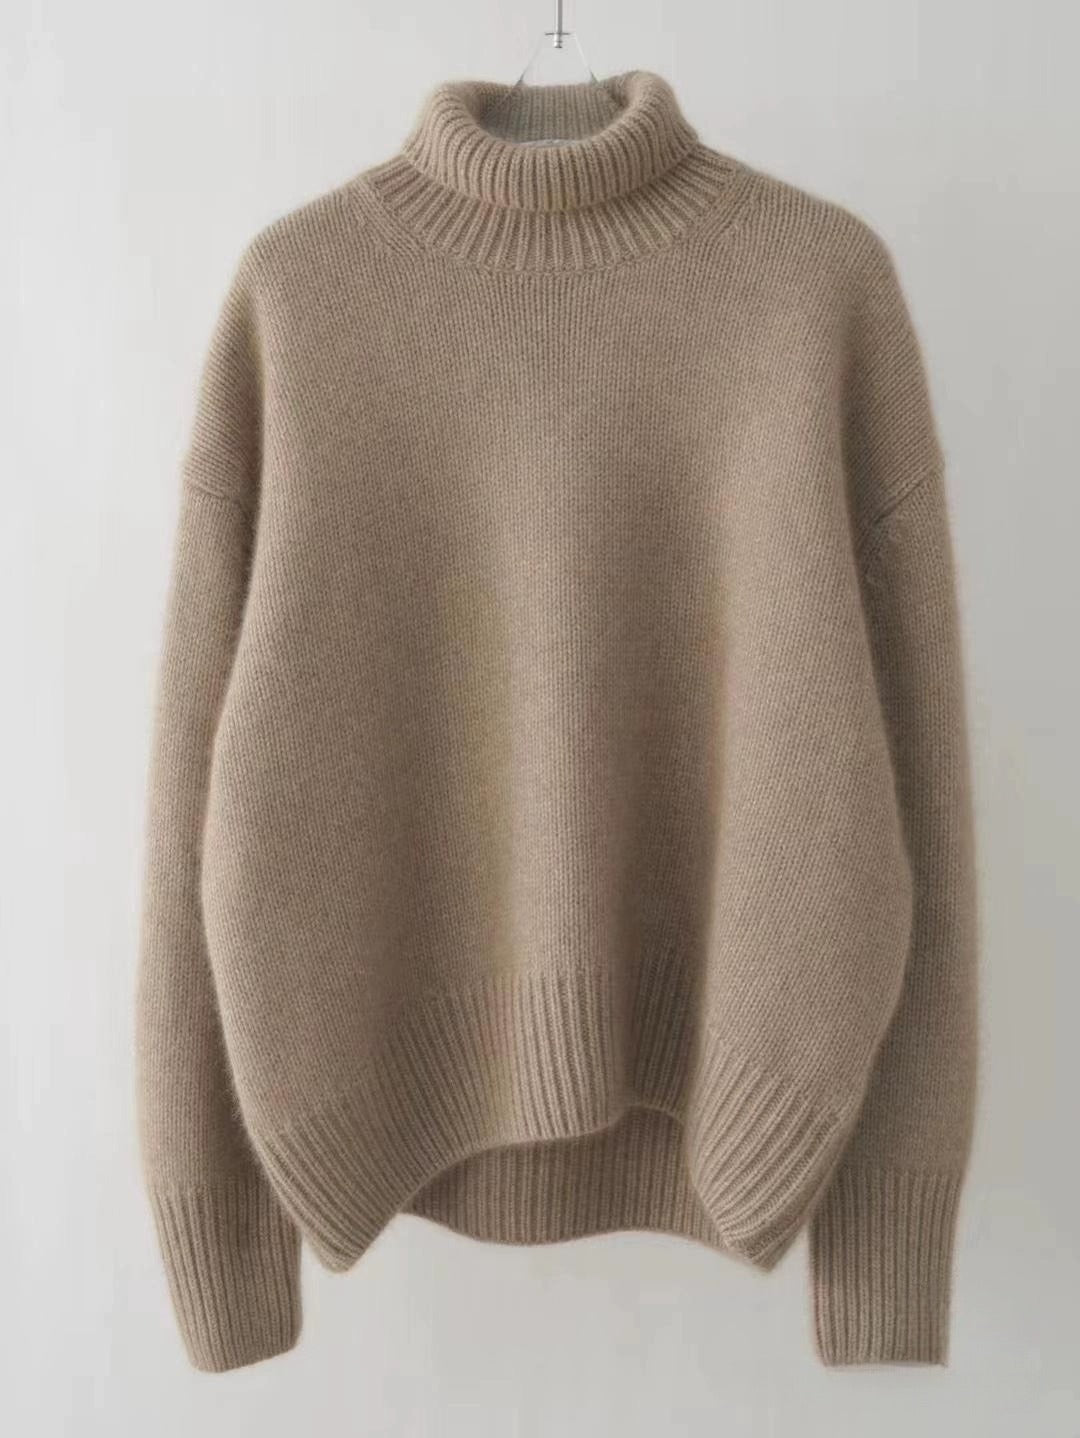 Women's All-match Knitted Pullover Sweater